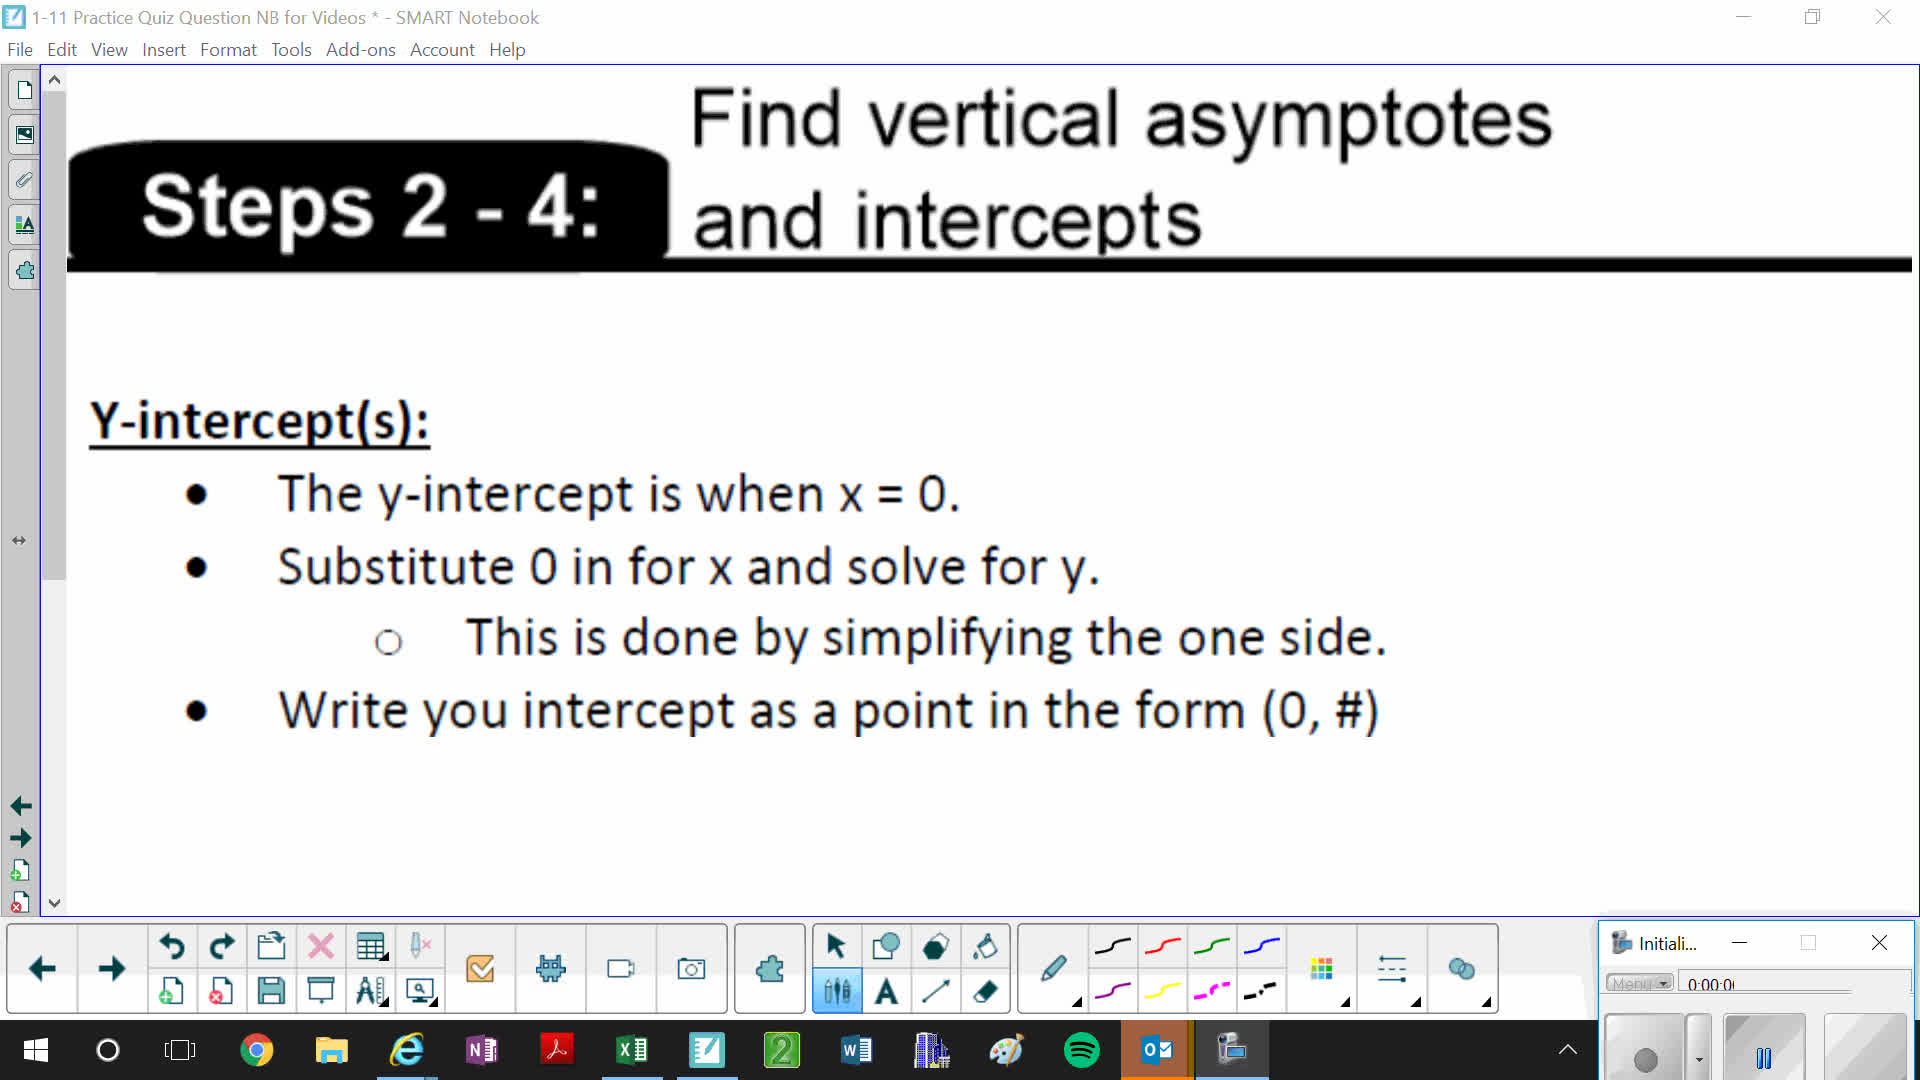 Finding the Y-intercept of a Rational Function